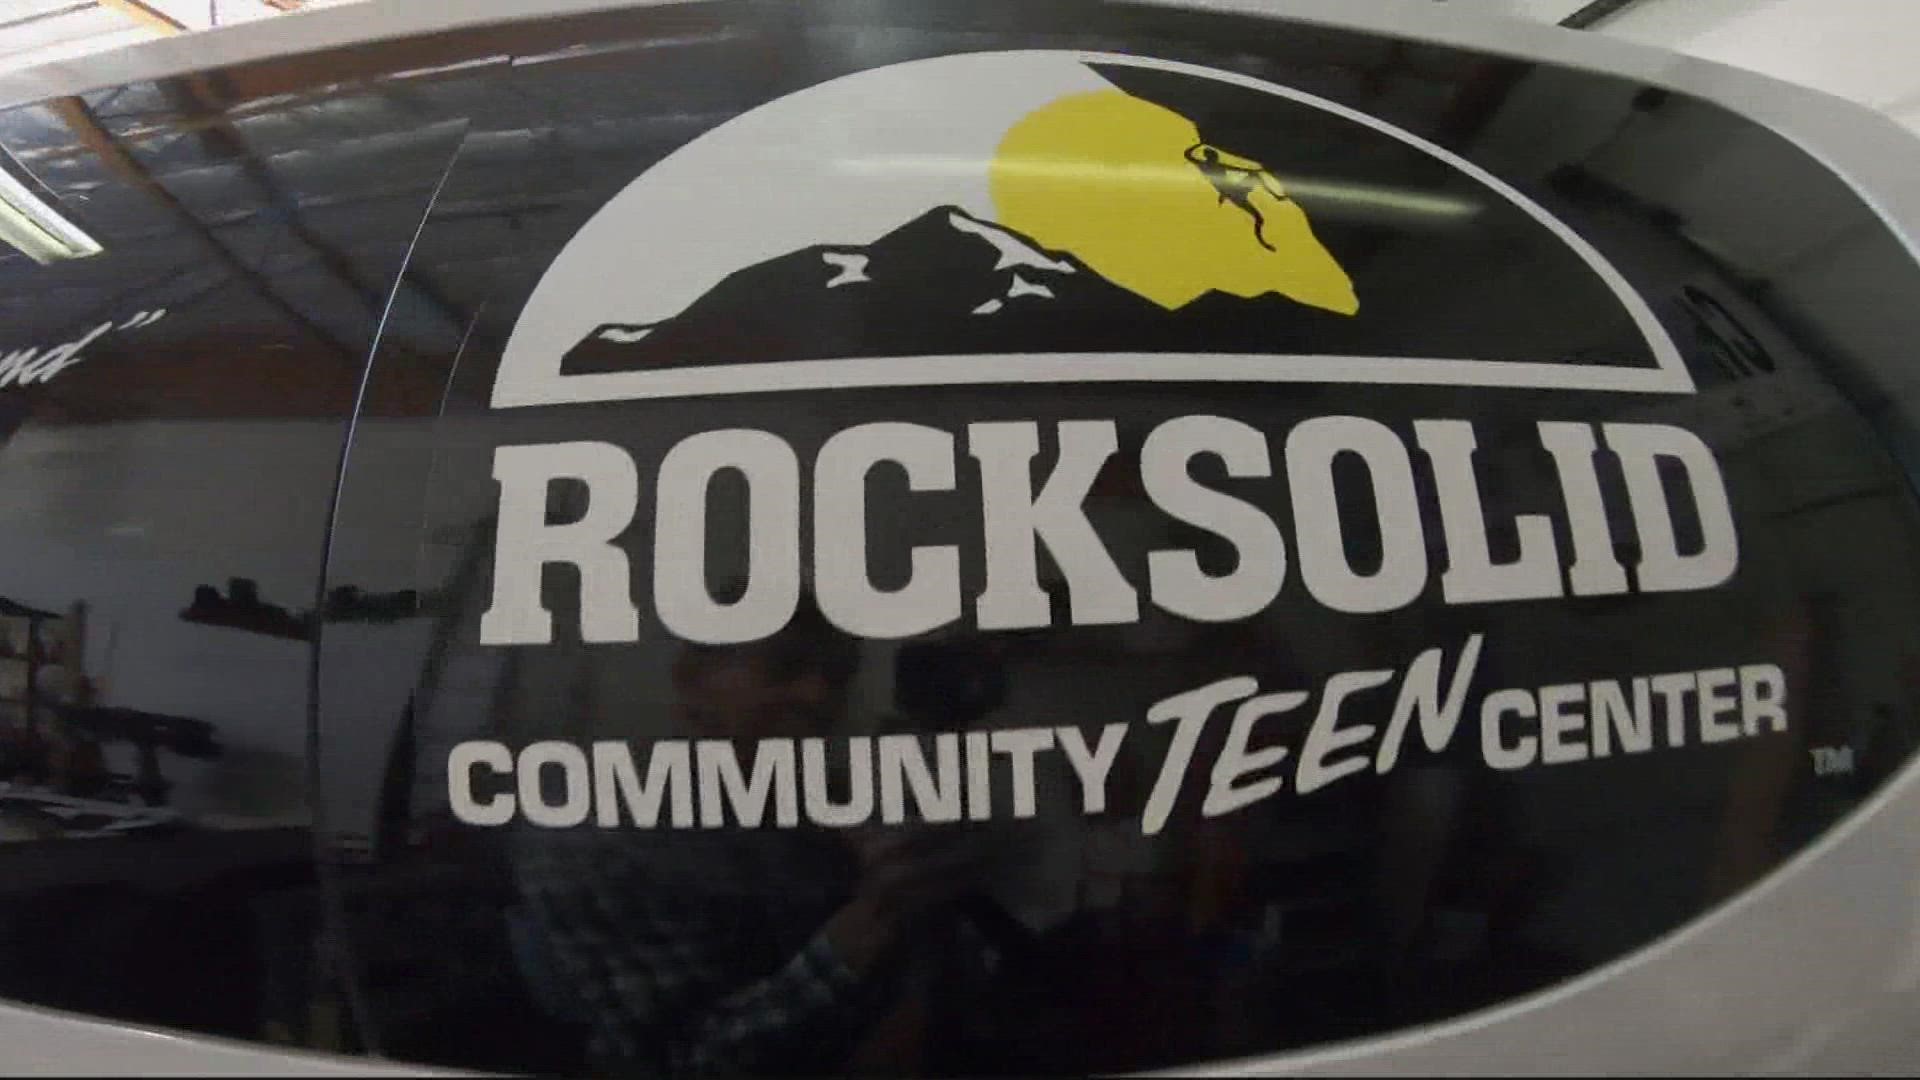 The Rocksolid Community Teen Center in Brush Prairie has new sets of wheels to help get teens to and from the center and go on field trips.